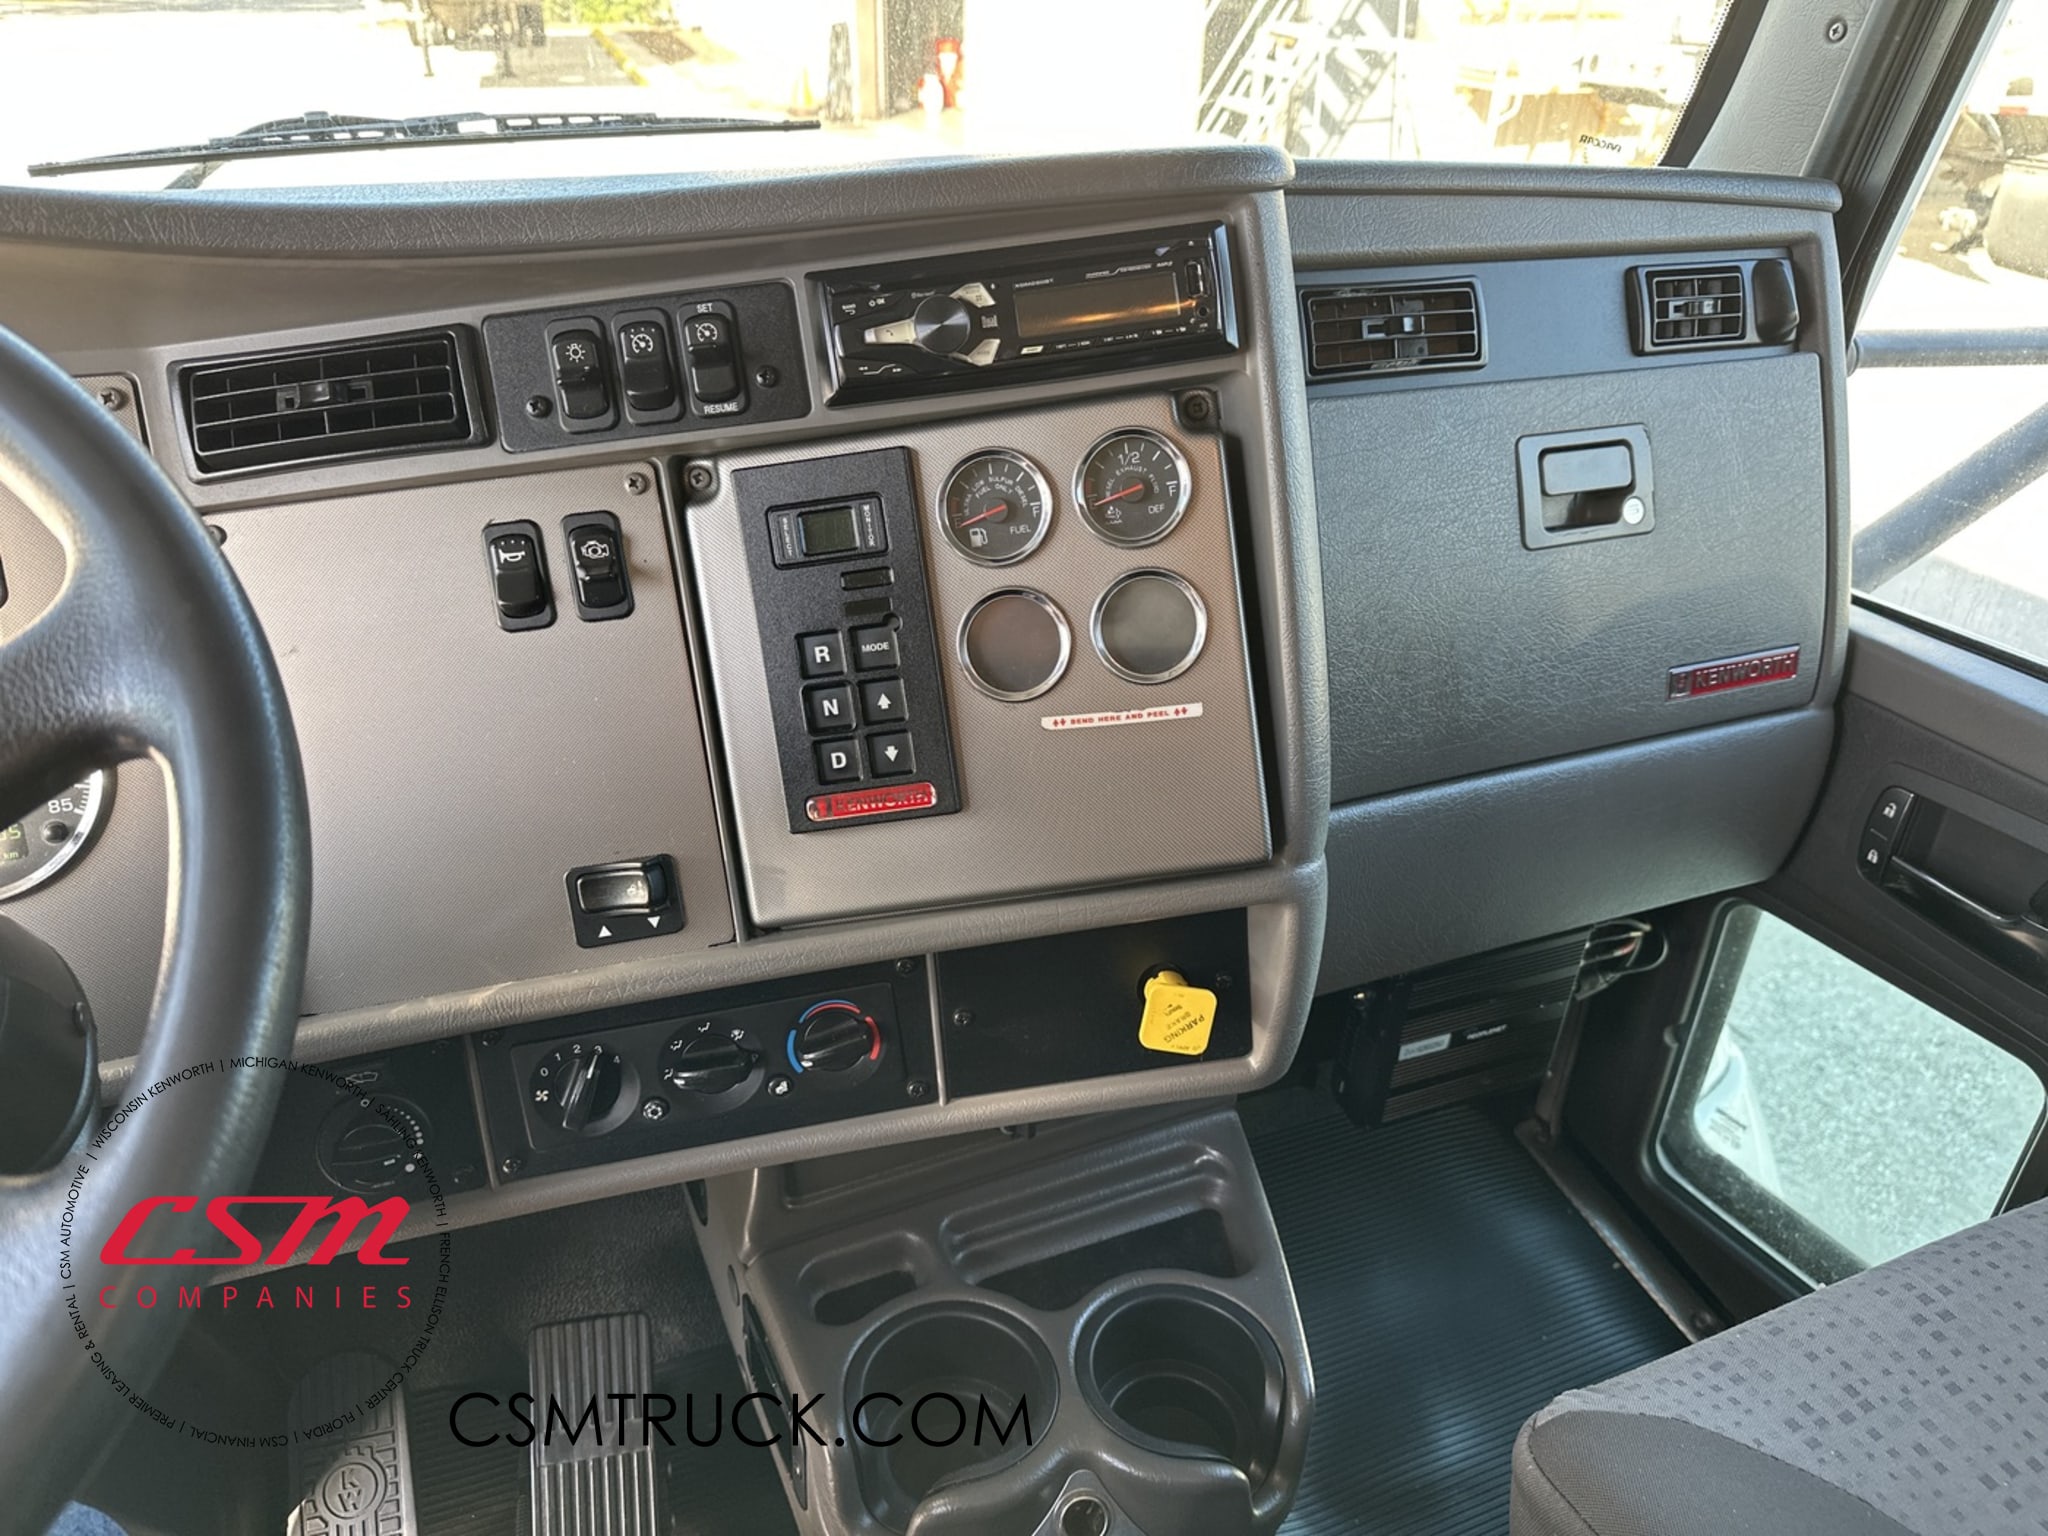 Interior radio and navigation system for this 2020 Kenworth T270 (Stock number: UJM204841)